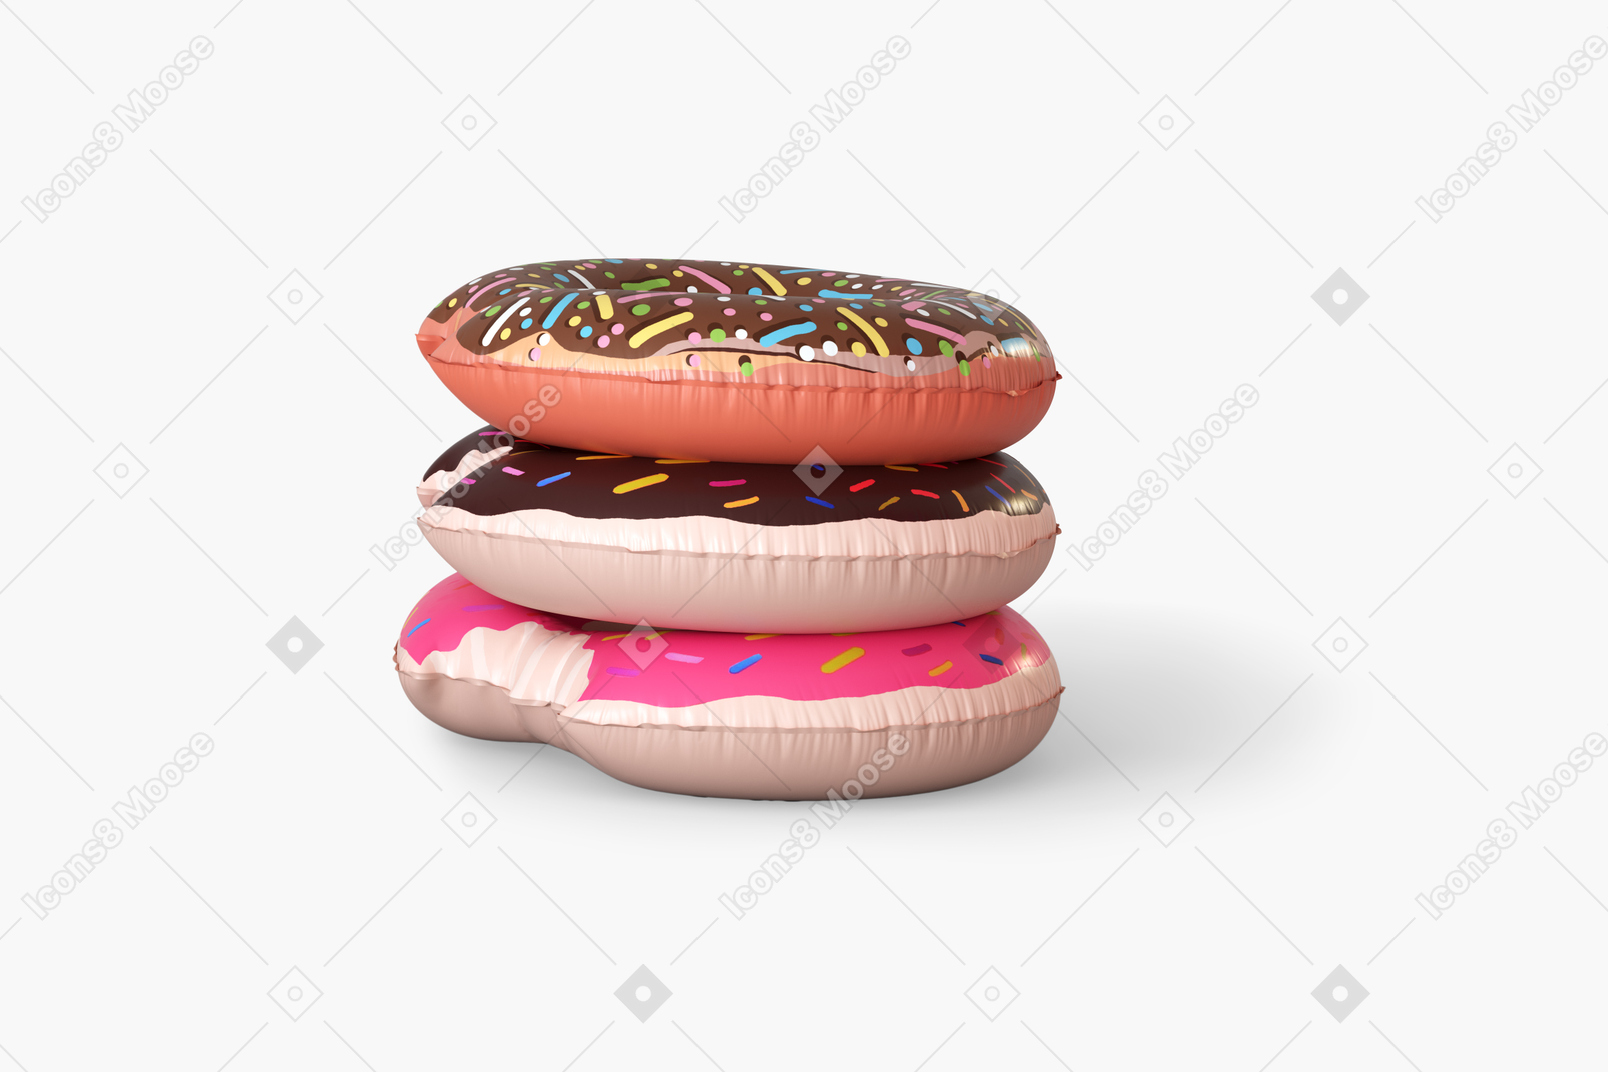 Donut rubber ring placed on each other on white background